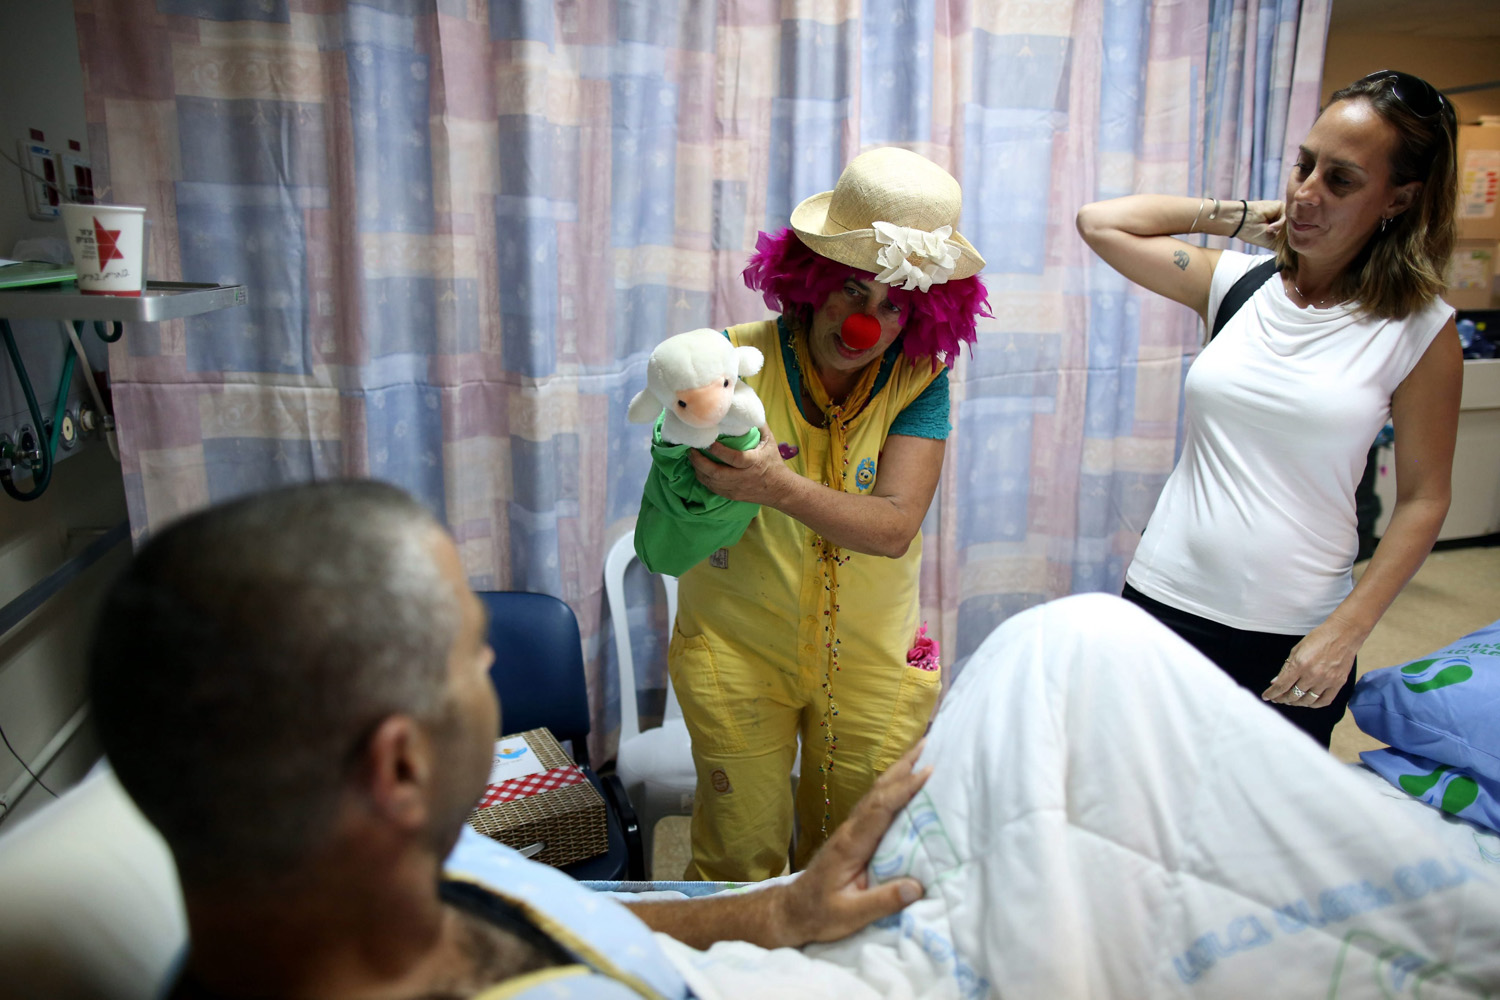 An Israeli woman dressed as a clown tries to cheer up an injured Israeli soldier who was wounded in fighting in the Gaza Strip, in the Soroka Hospital in Beersheba, Israel, July 30, 2014.